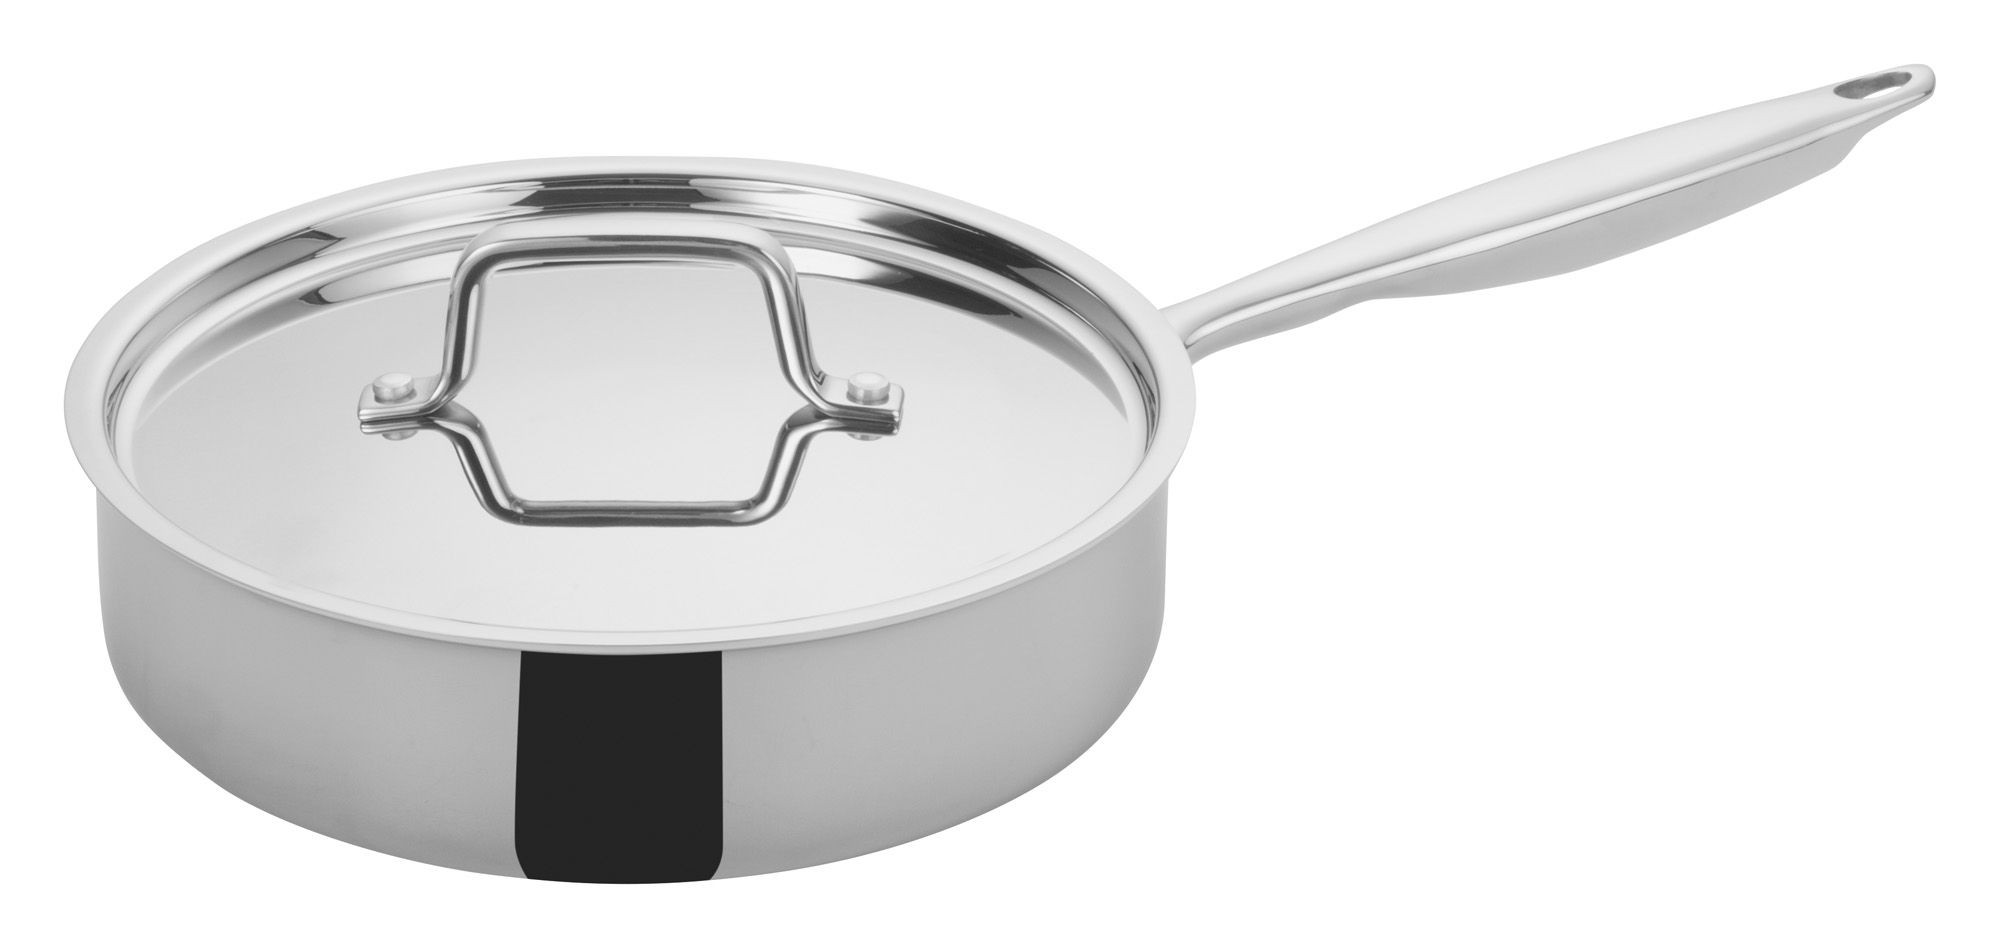 Winco TGET-3 Tri-Ply Stainless Steel 3 Qt. Saute´ Pan with Cover